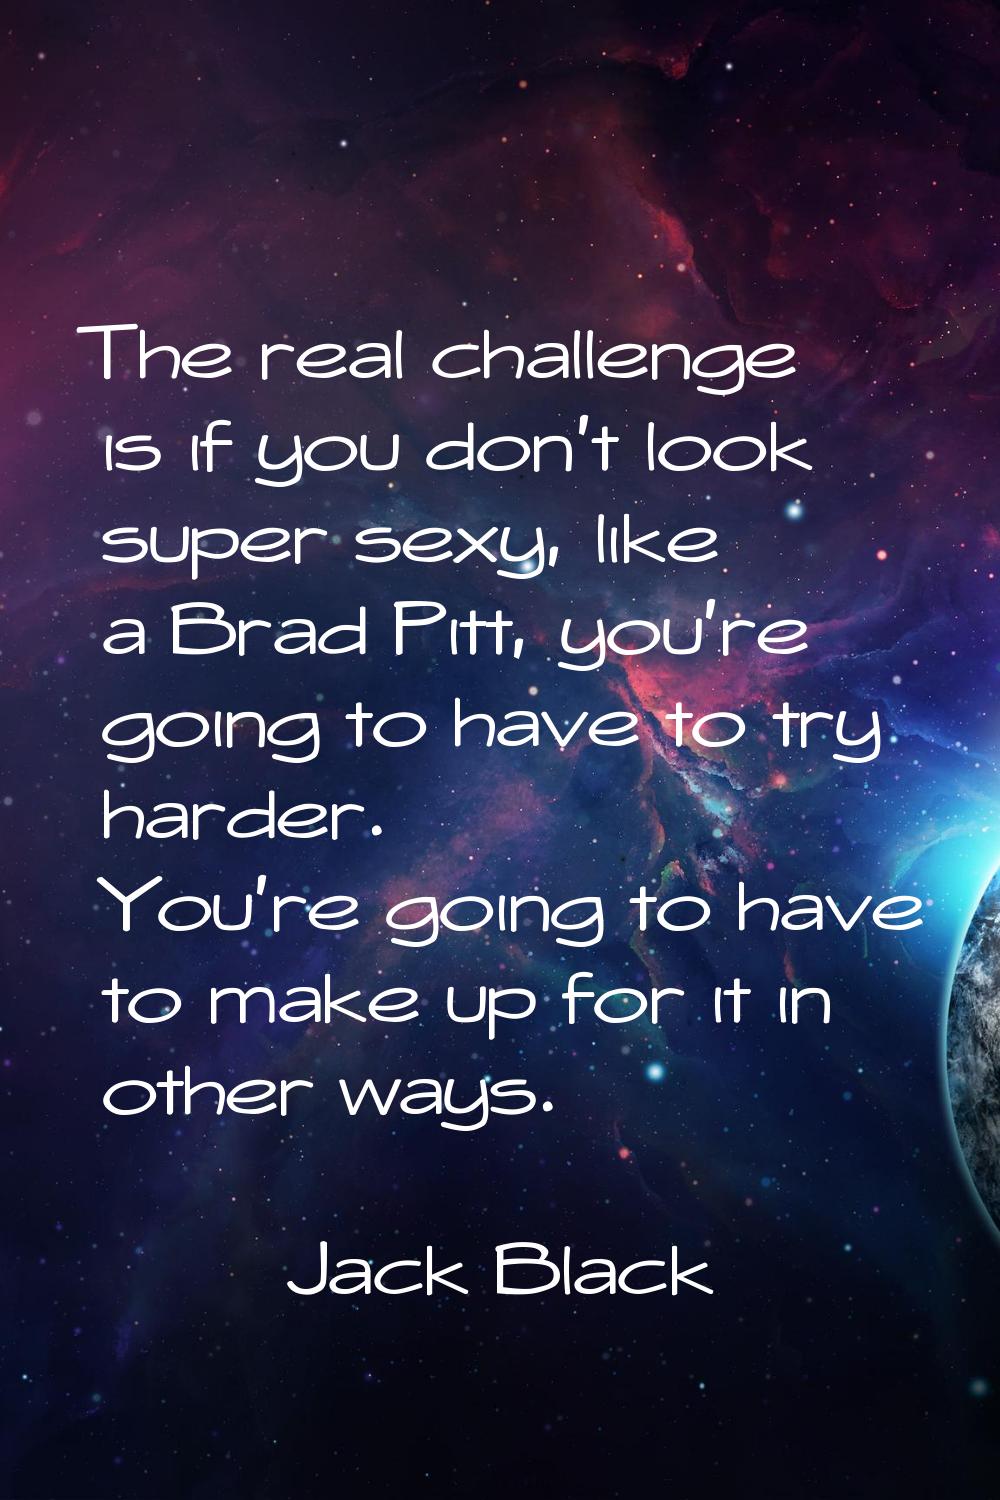 The real challenge is if you don't look super sexy, like a Brad Pitt, you're going to have to try h